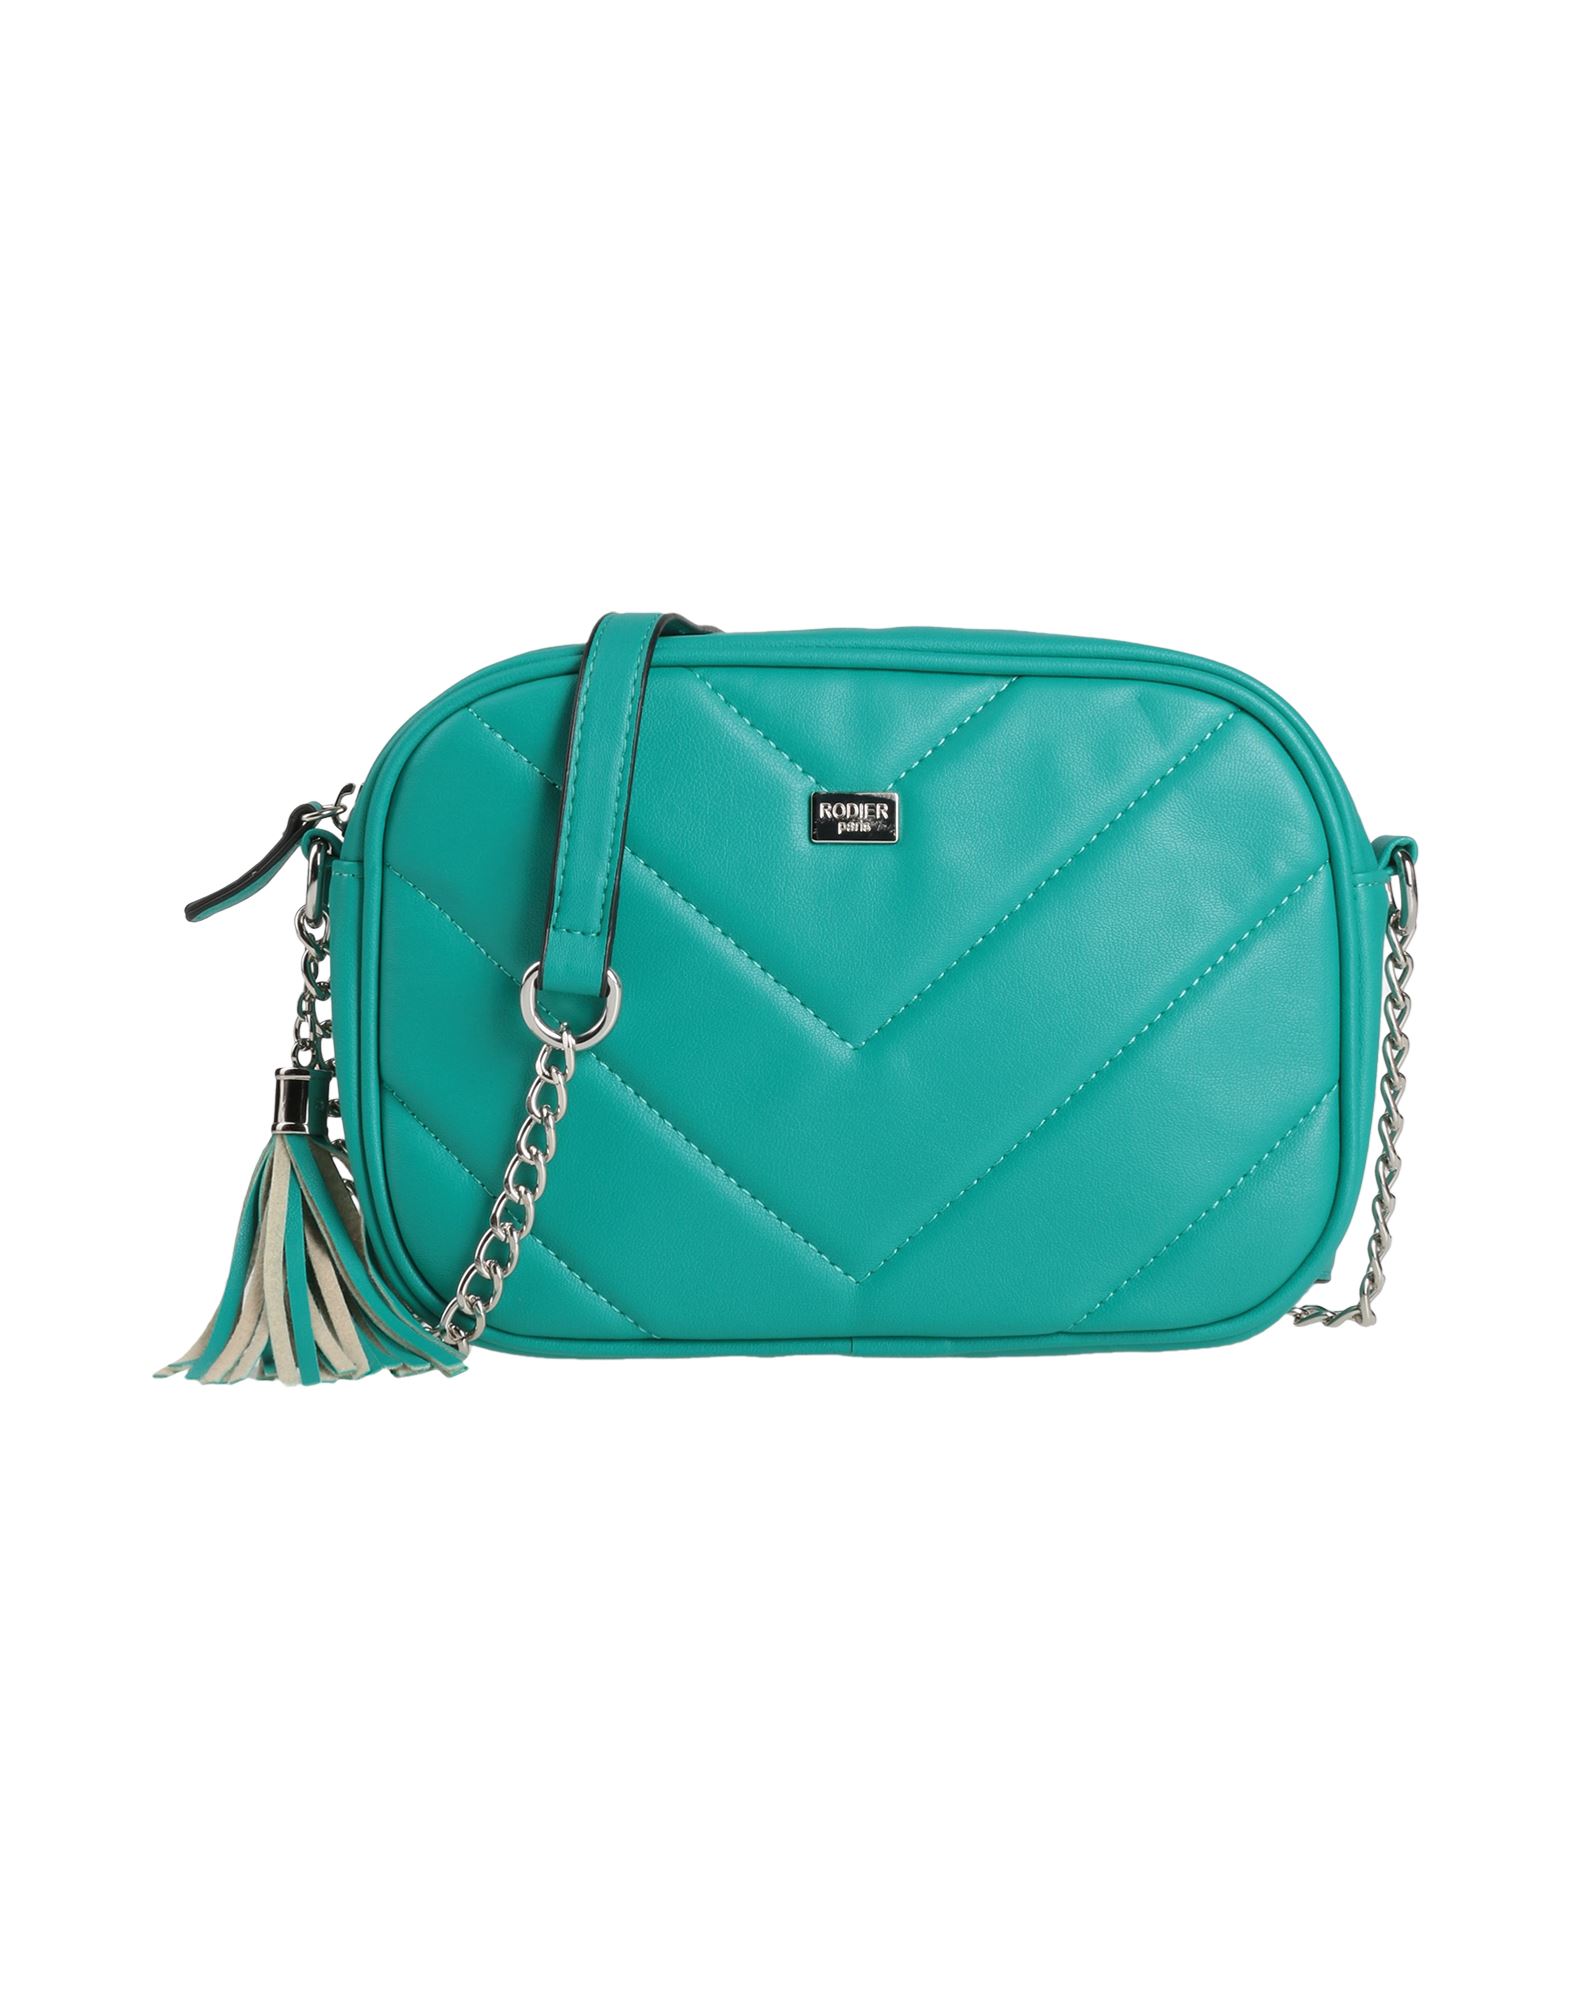 Rodier Handbags In Turquoise